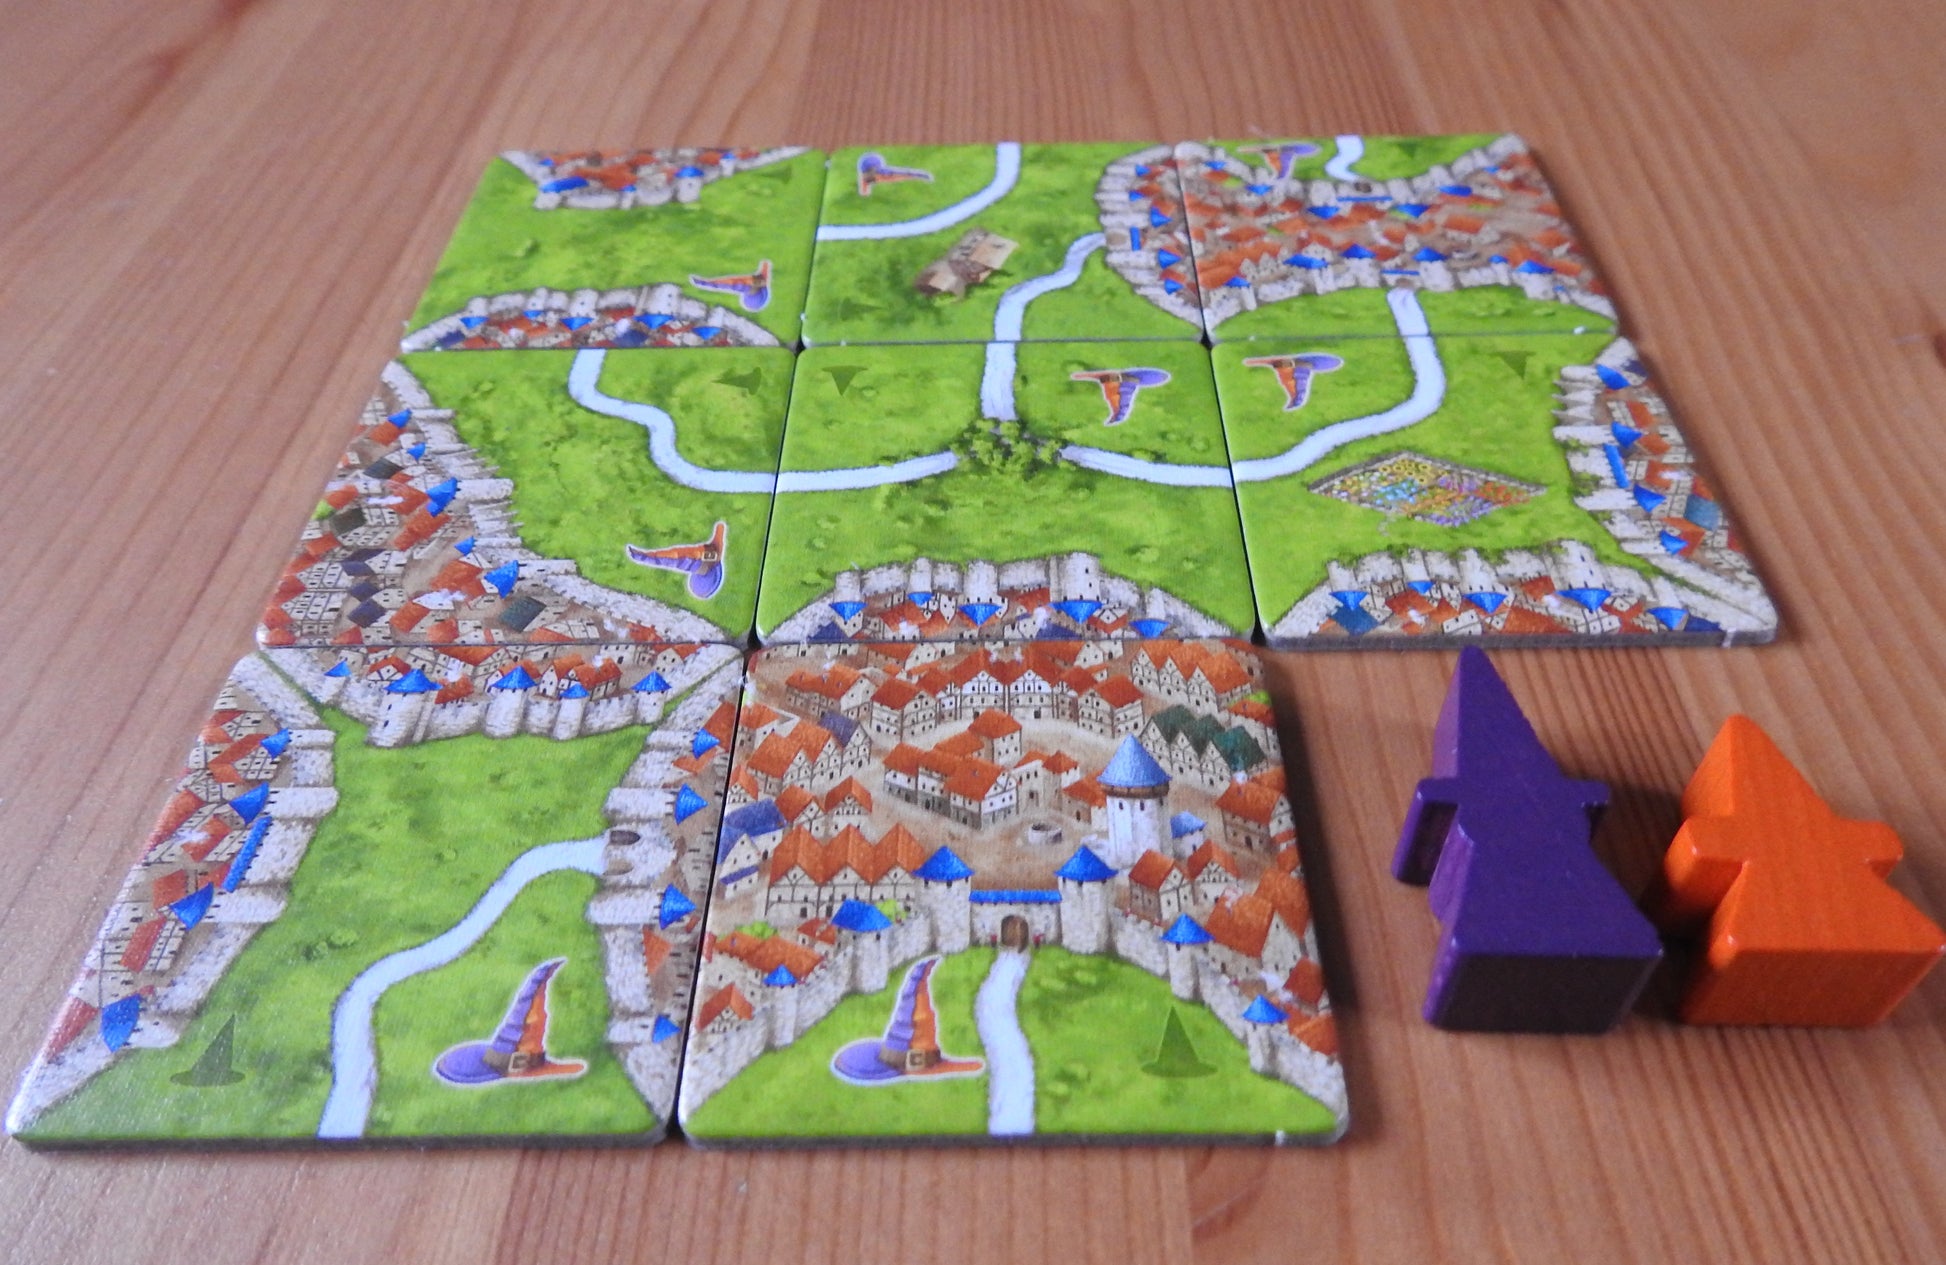 Another view of the included contents of this Carcassonne Mage & Witch expansion.